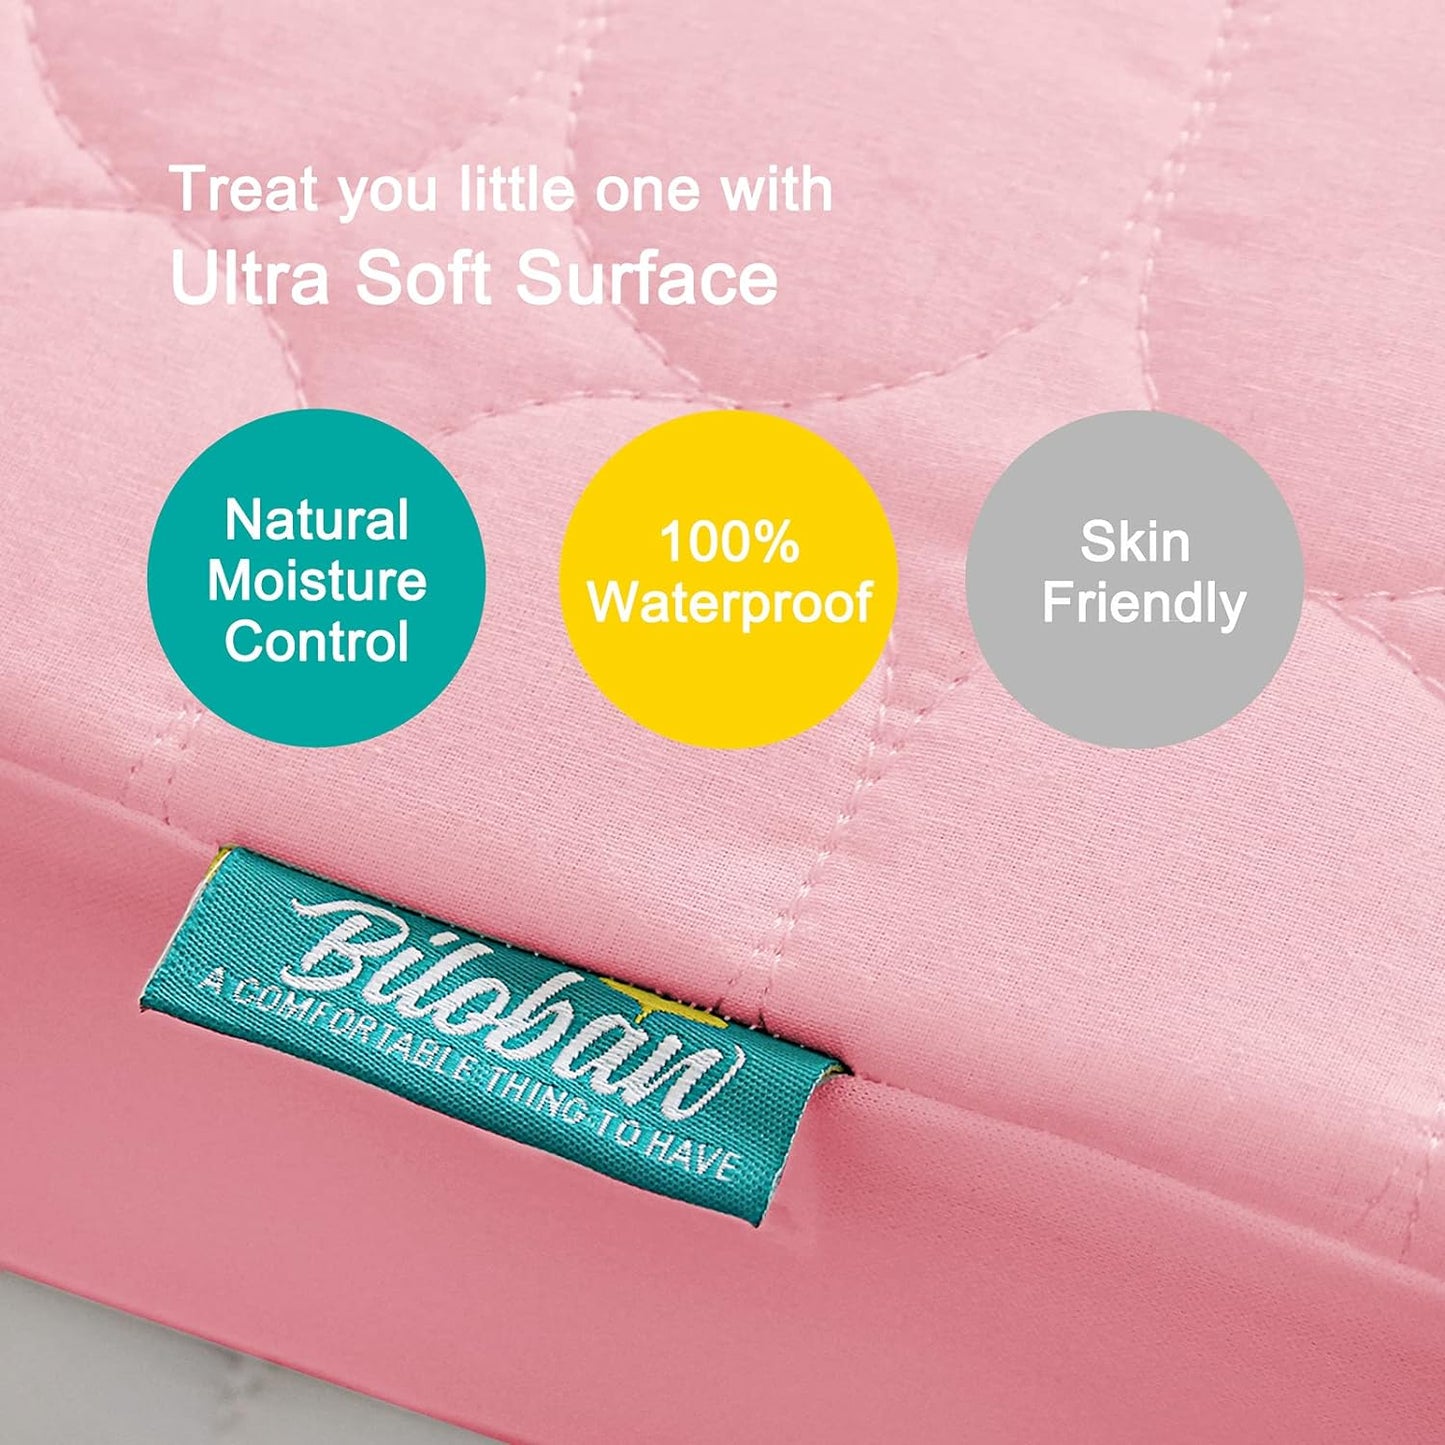 Crib Mattress Protector/ Pad Cover - 2 Pack, Quilted Microfiber, Waterproof, Pink (for Standard Crib/ Toddler Bed)